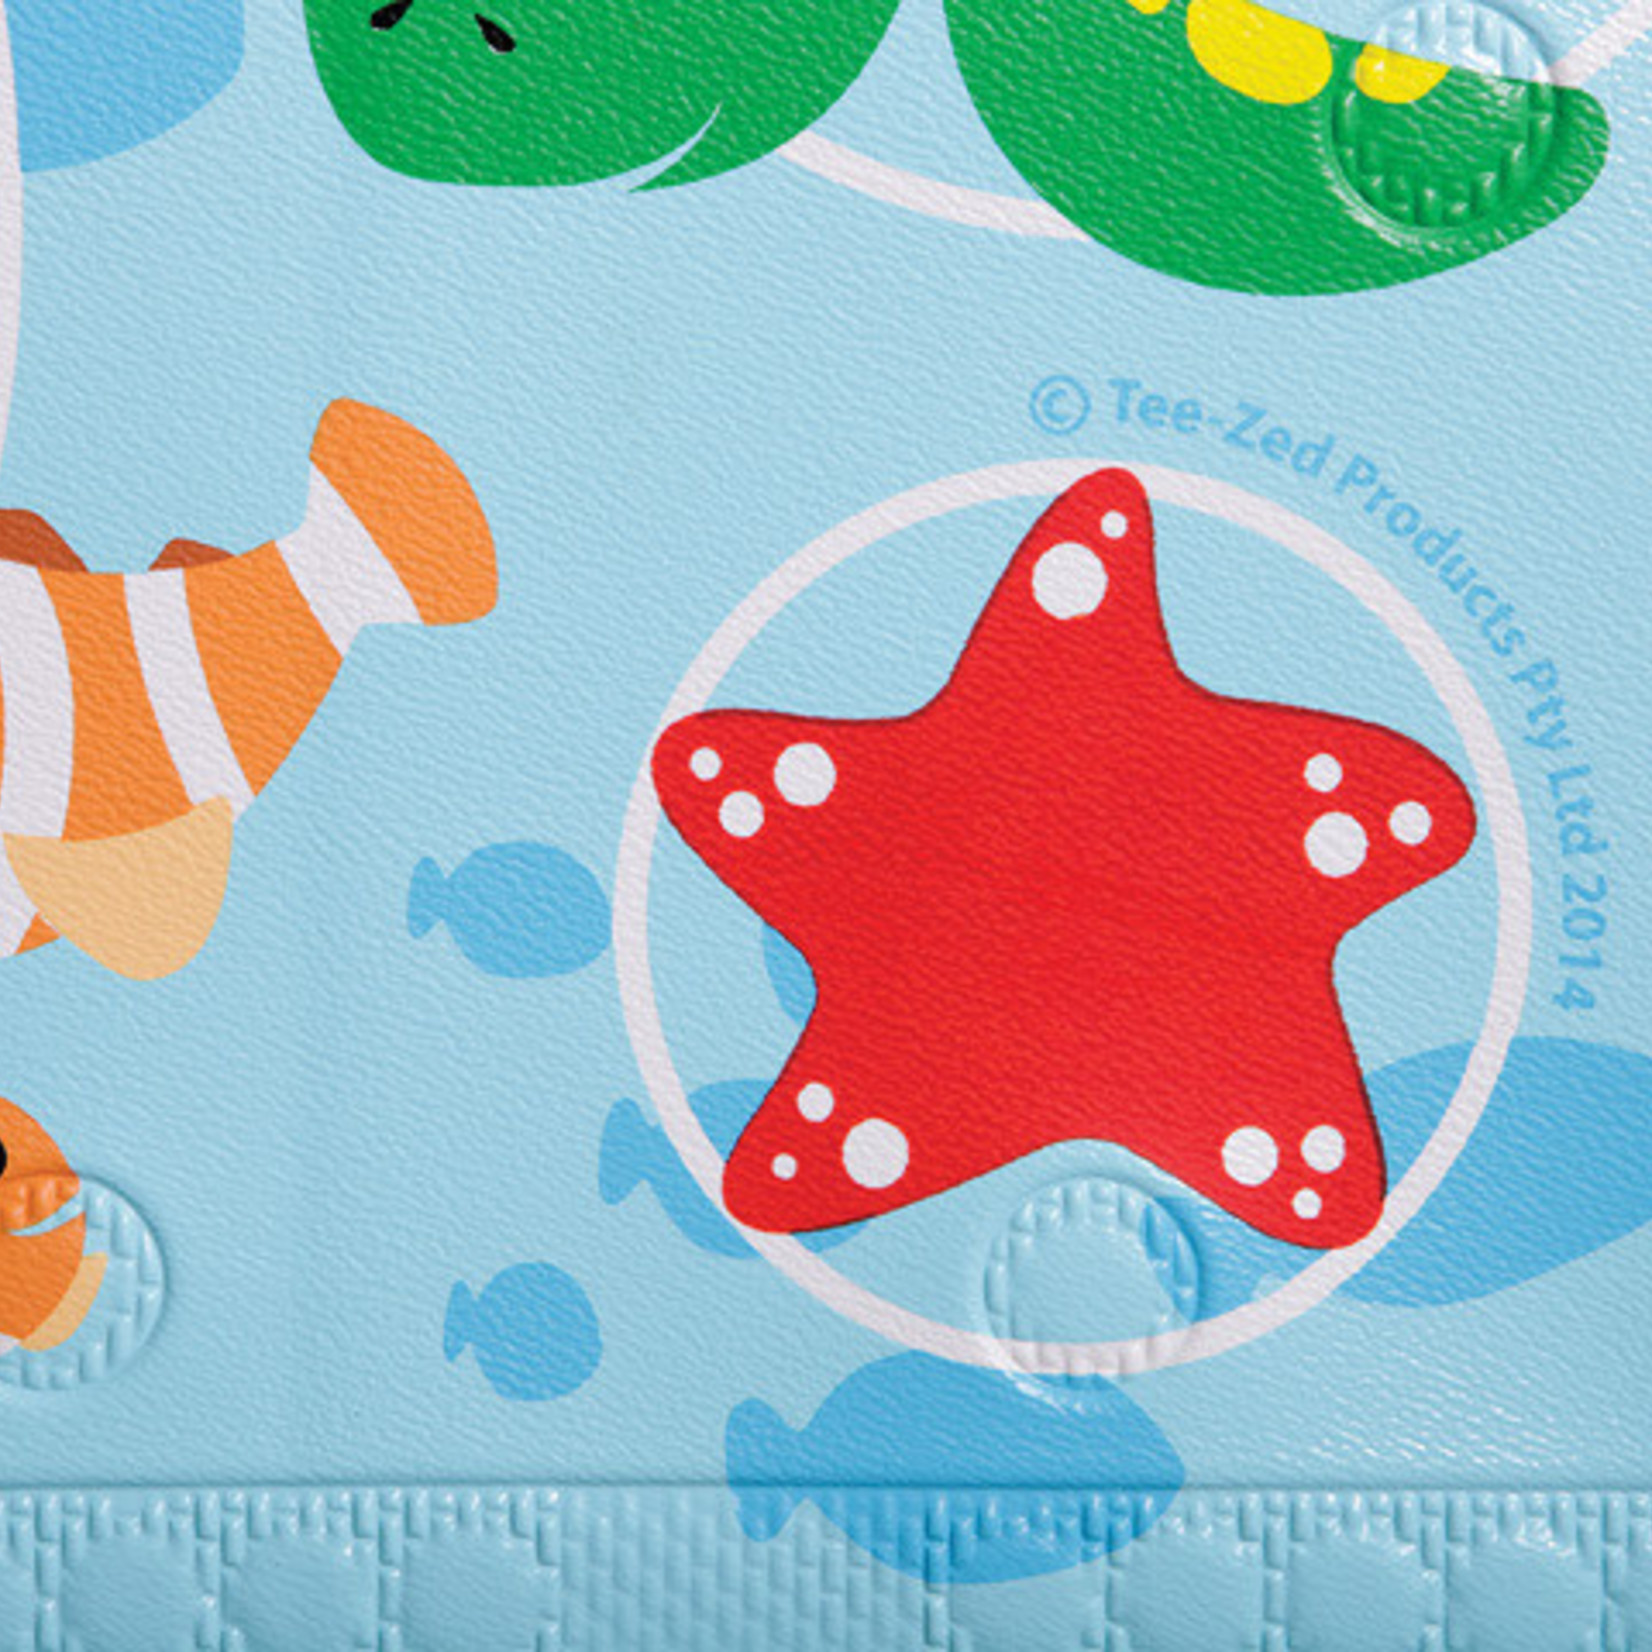 Dreambaby WATCH-YOUR-STEP® ANTI-SLIP BATH MAT WITH 'TOO HOT’ INDICATOR